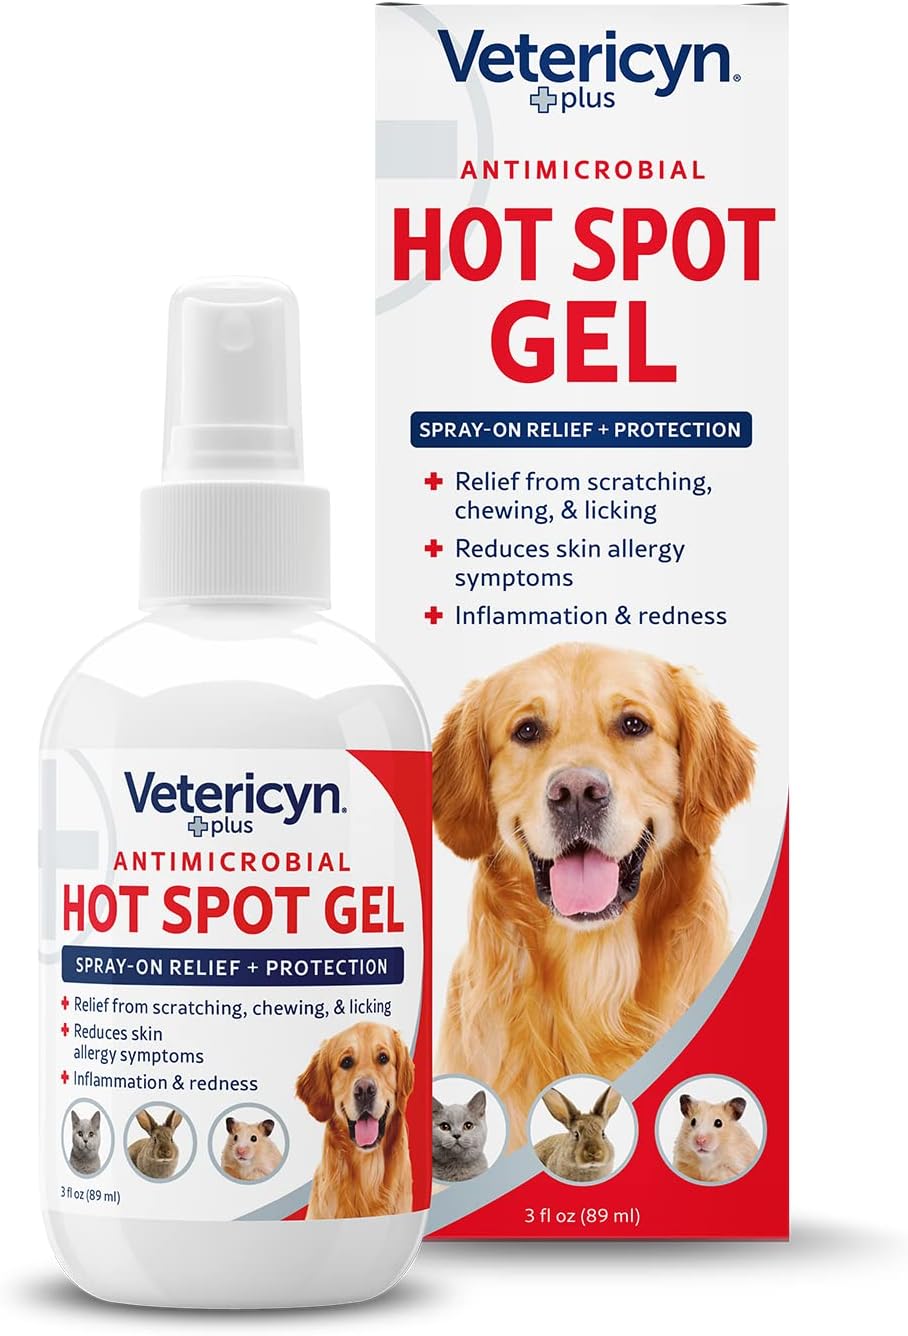 Vetericyn Plus Dog Hot Spot Gel | Spray-On Hot Spot Care for Dogs, Relieves Dog Itchy Skin and Allergy Symptoms, Helps with Skin Inflammation and Redness, Safe for All Animals. 3 ounces